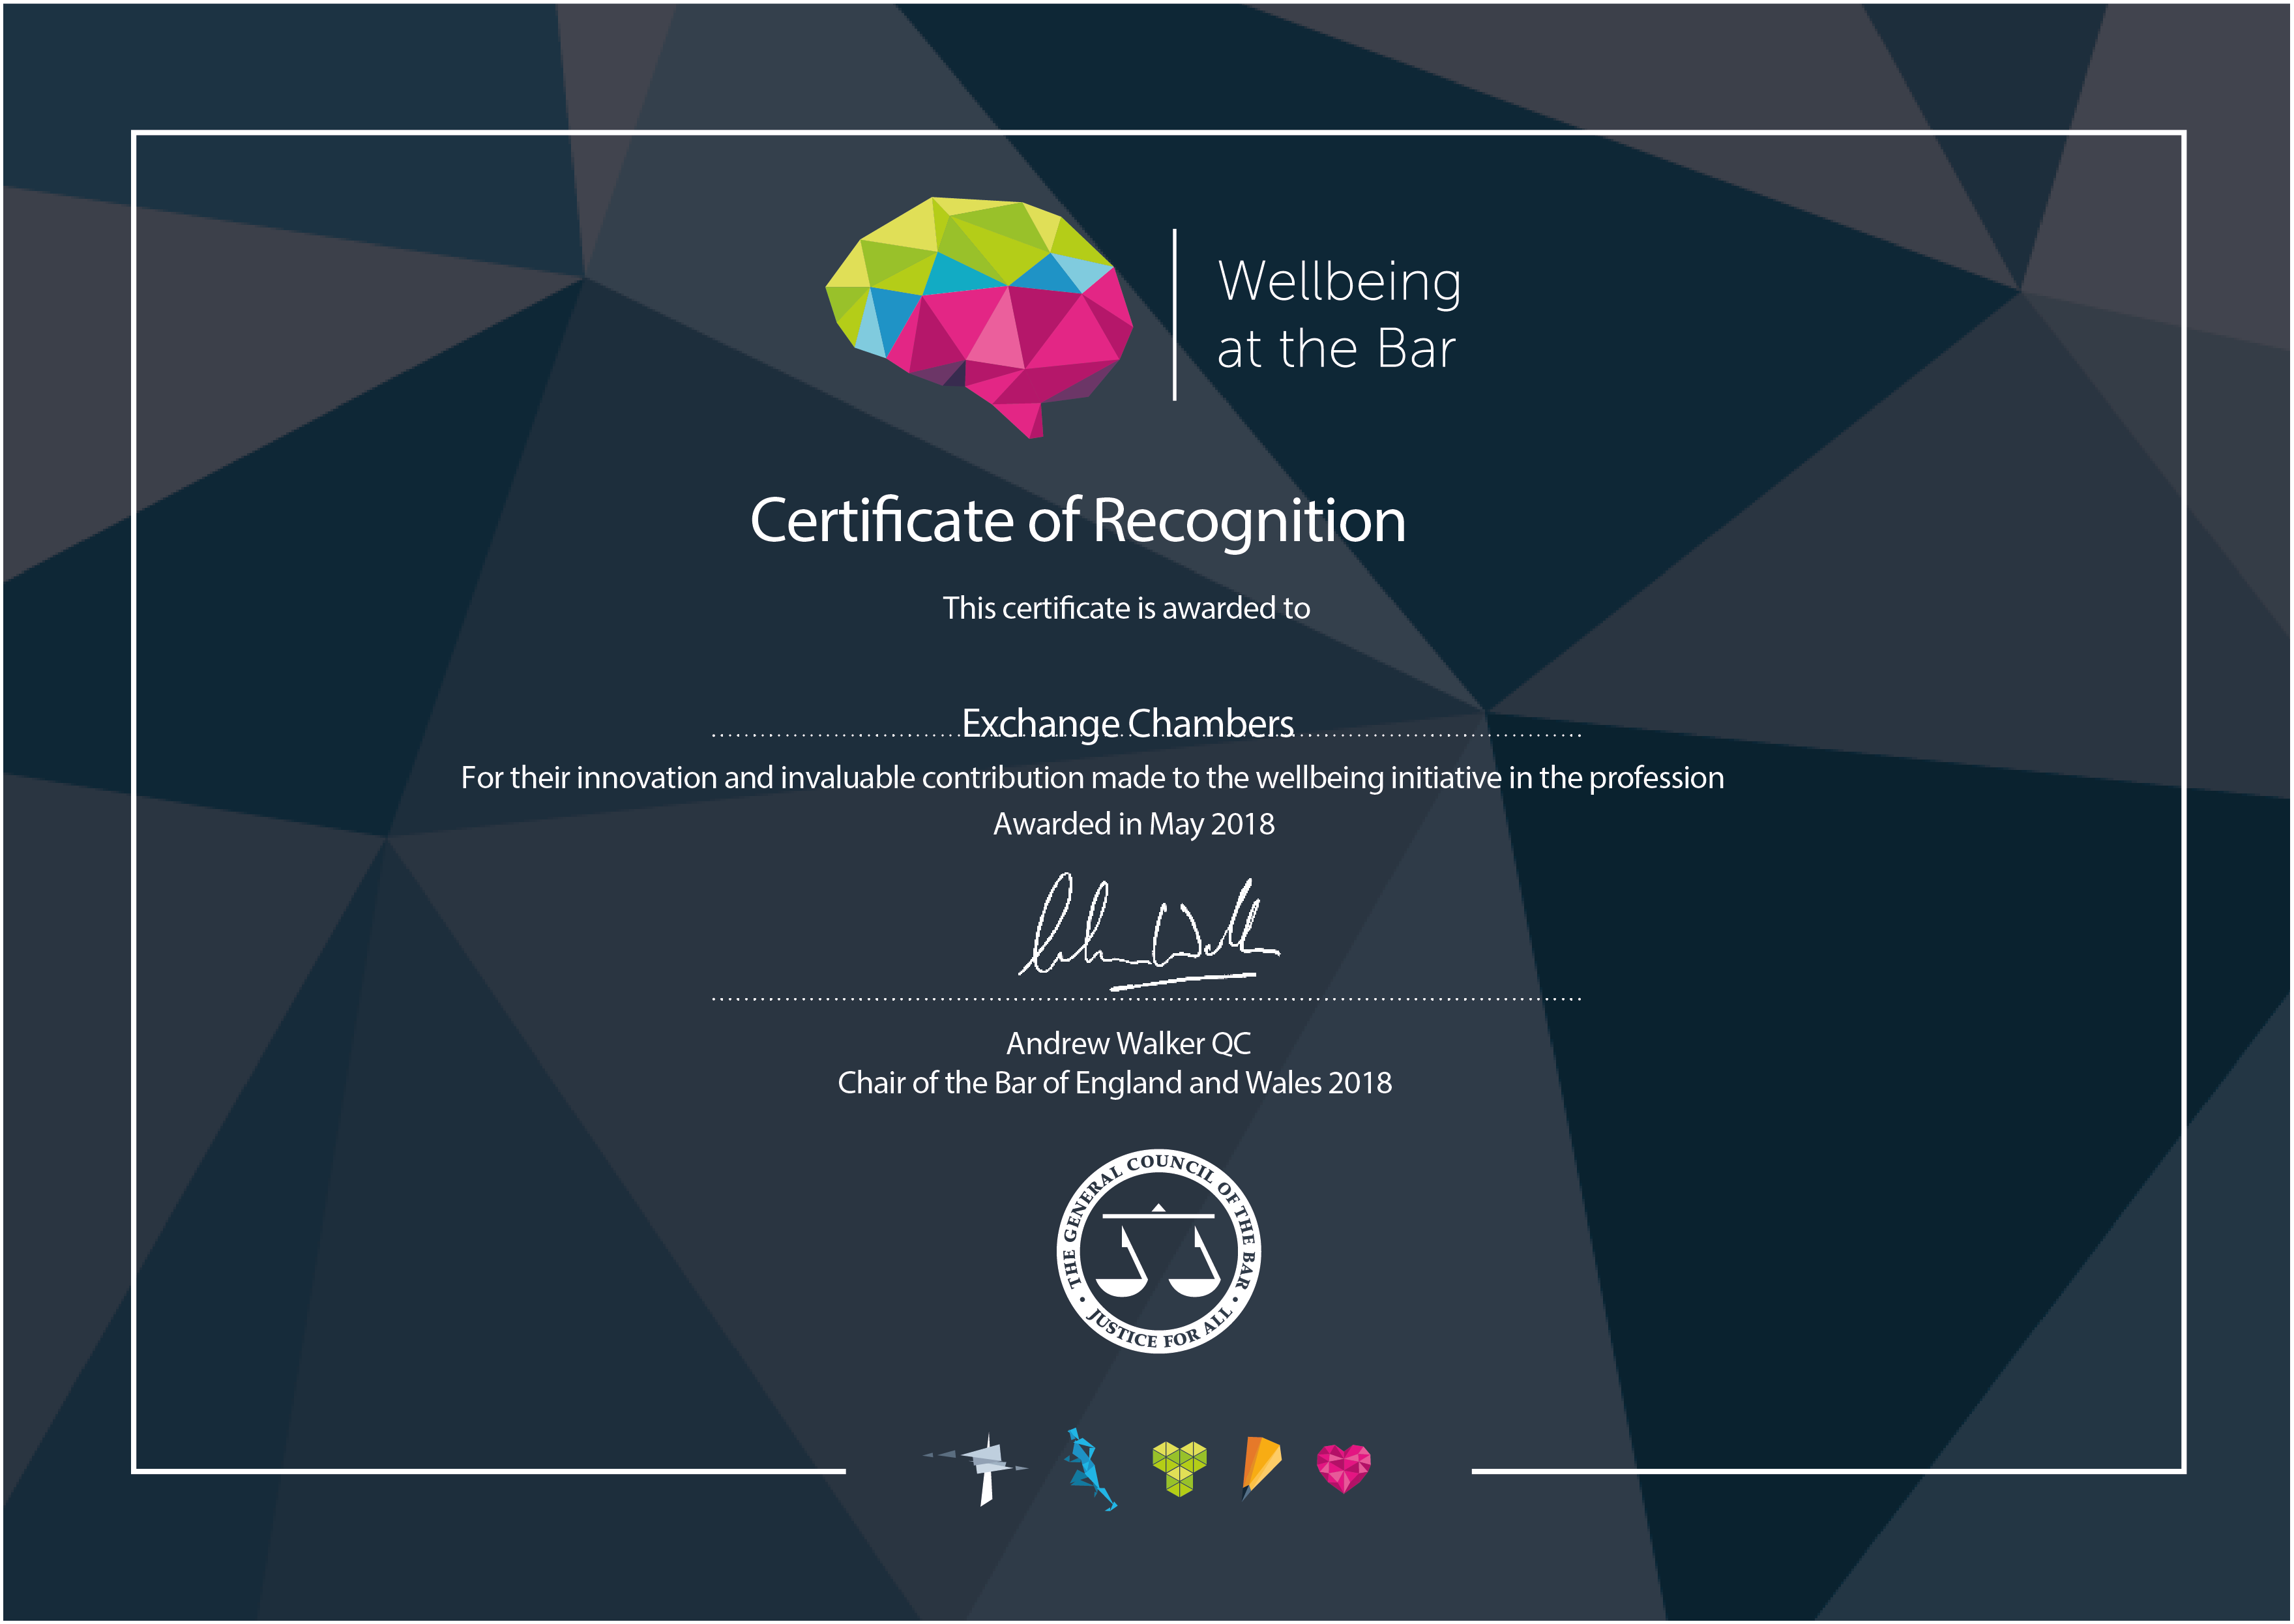 Wellbeing at the Bar Certificate